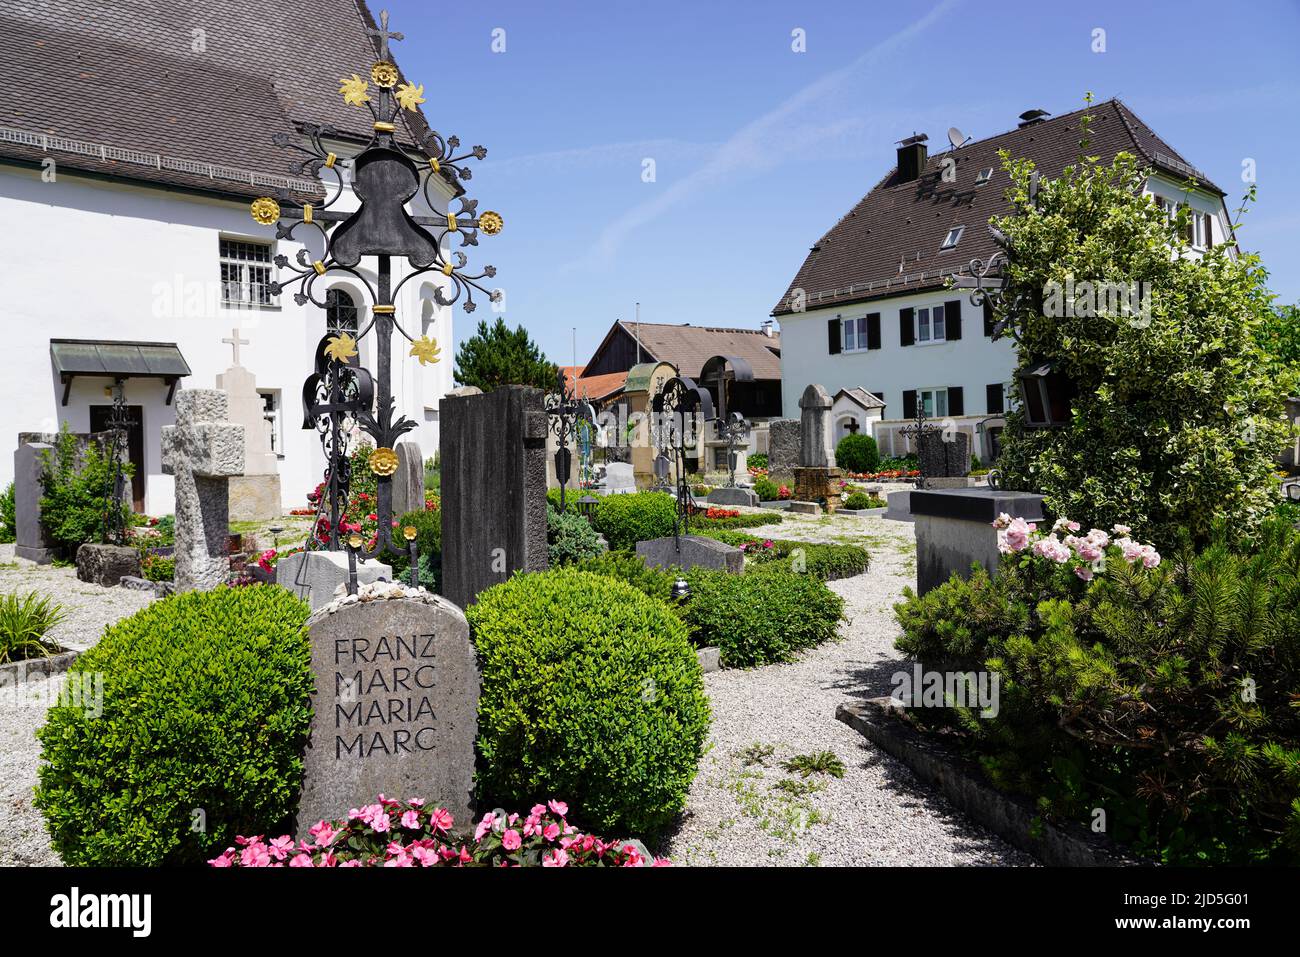 Grave of painter and Der Blaue Reiter member Franz Marc and his wife Maria at the cemetery of St. Michael church, Kochel, Bavaria, Germany, 18.6.22 Stock Photo